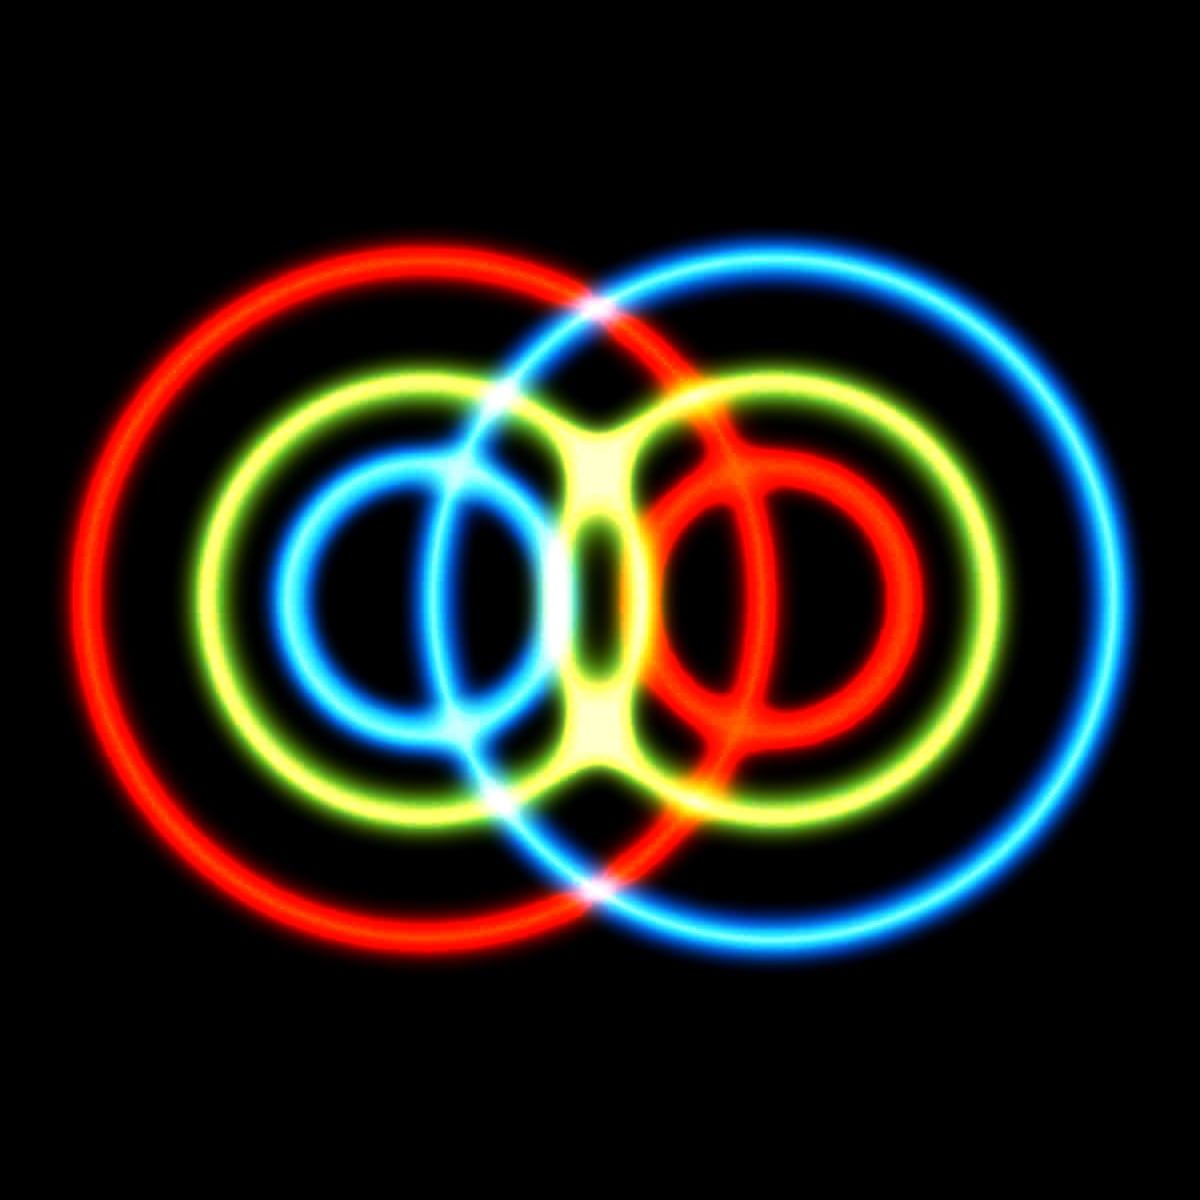 A visual representation of quantum entanglement, showing two sets of concentric rings interfering with each other, in yellows, blues and reds on a black background.